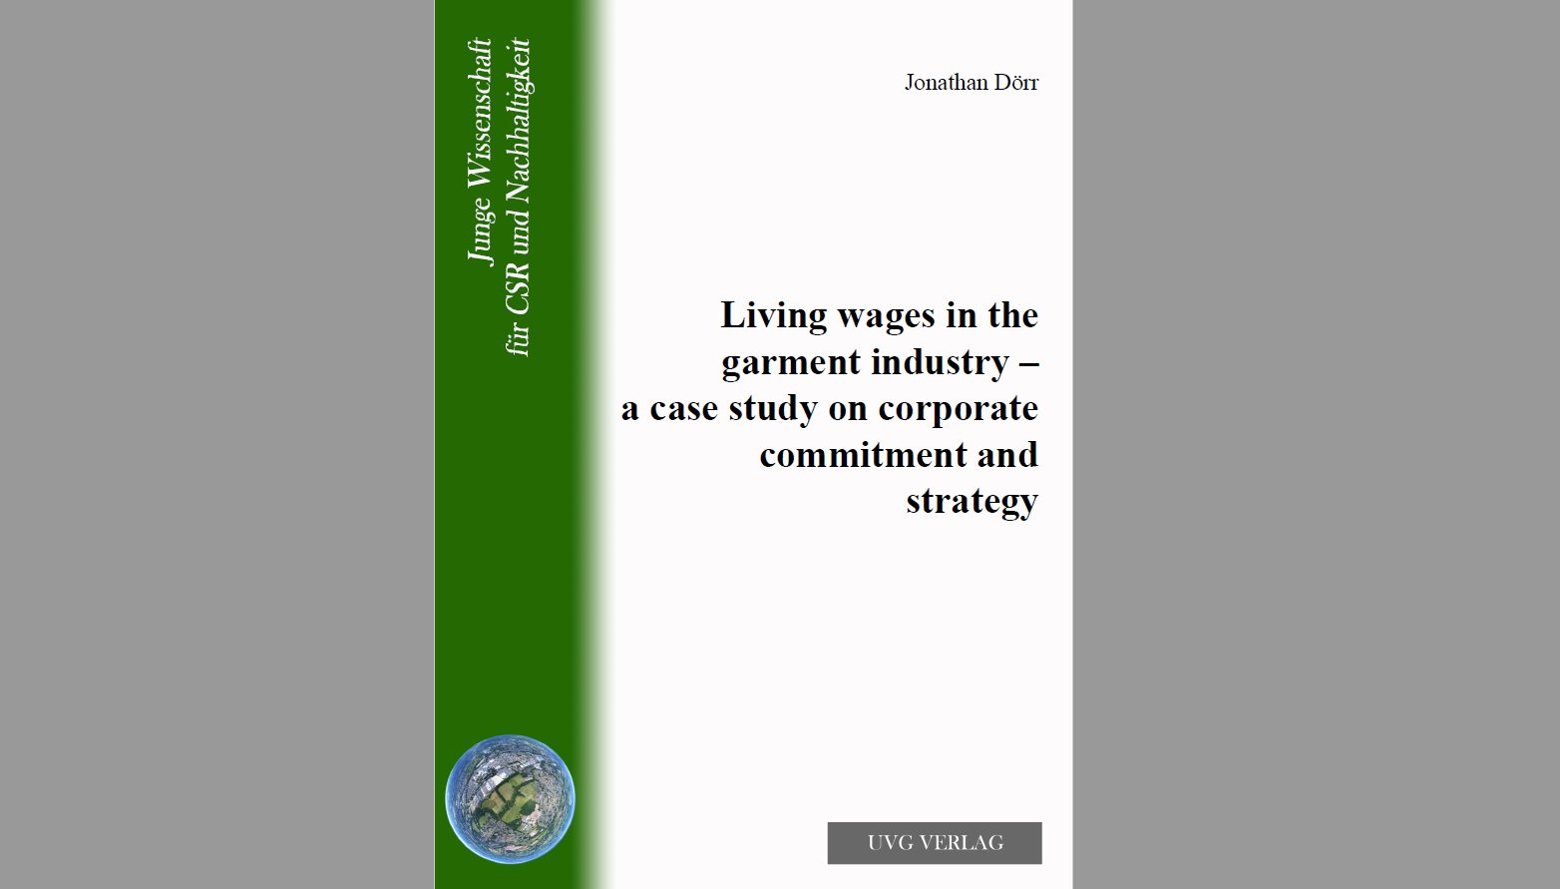 Living wages in the garment industry – a case study on corporate commitment and strategy